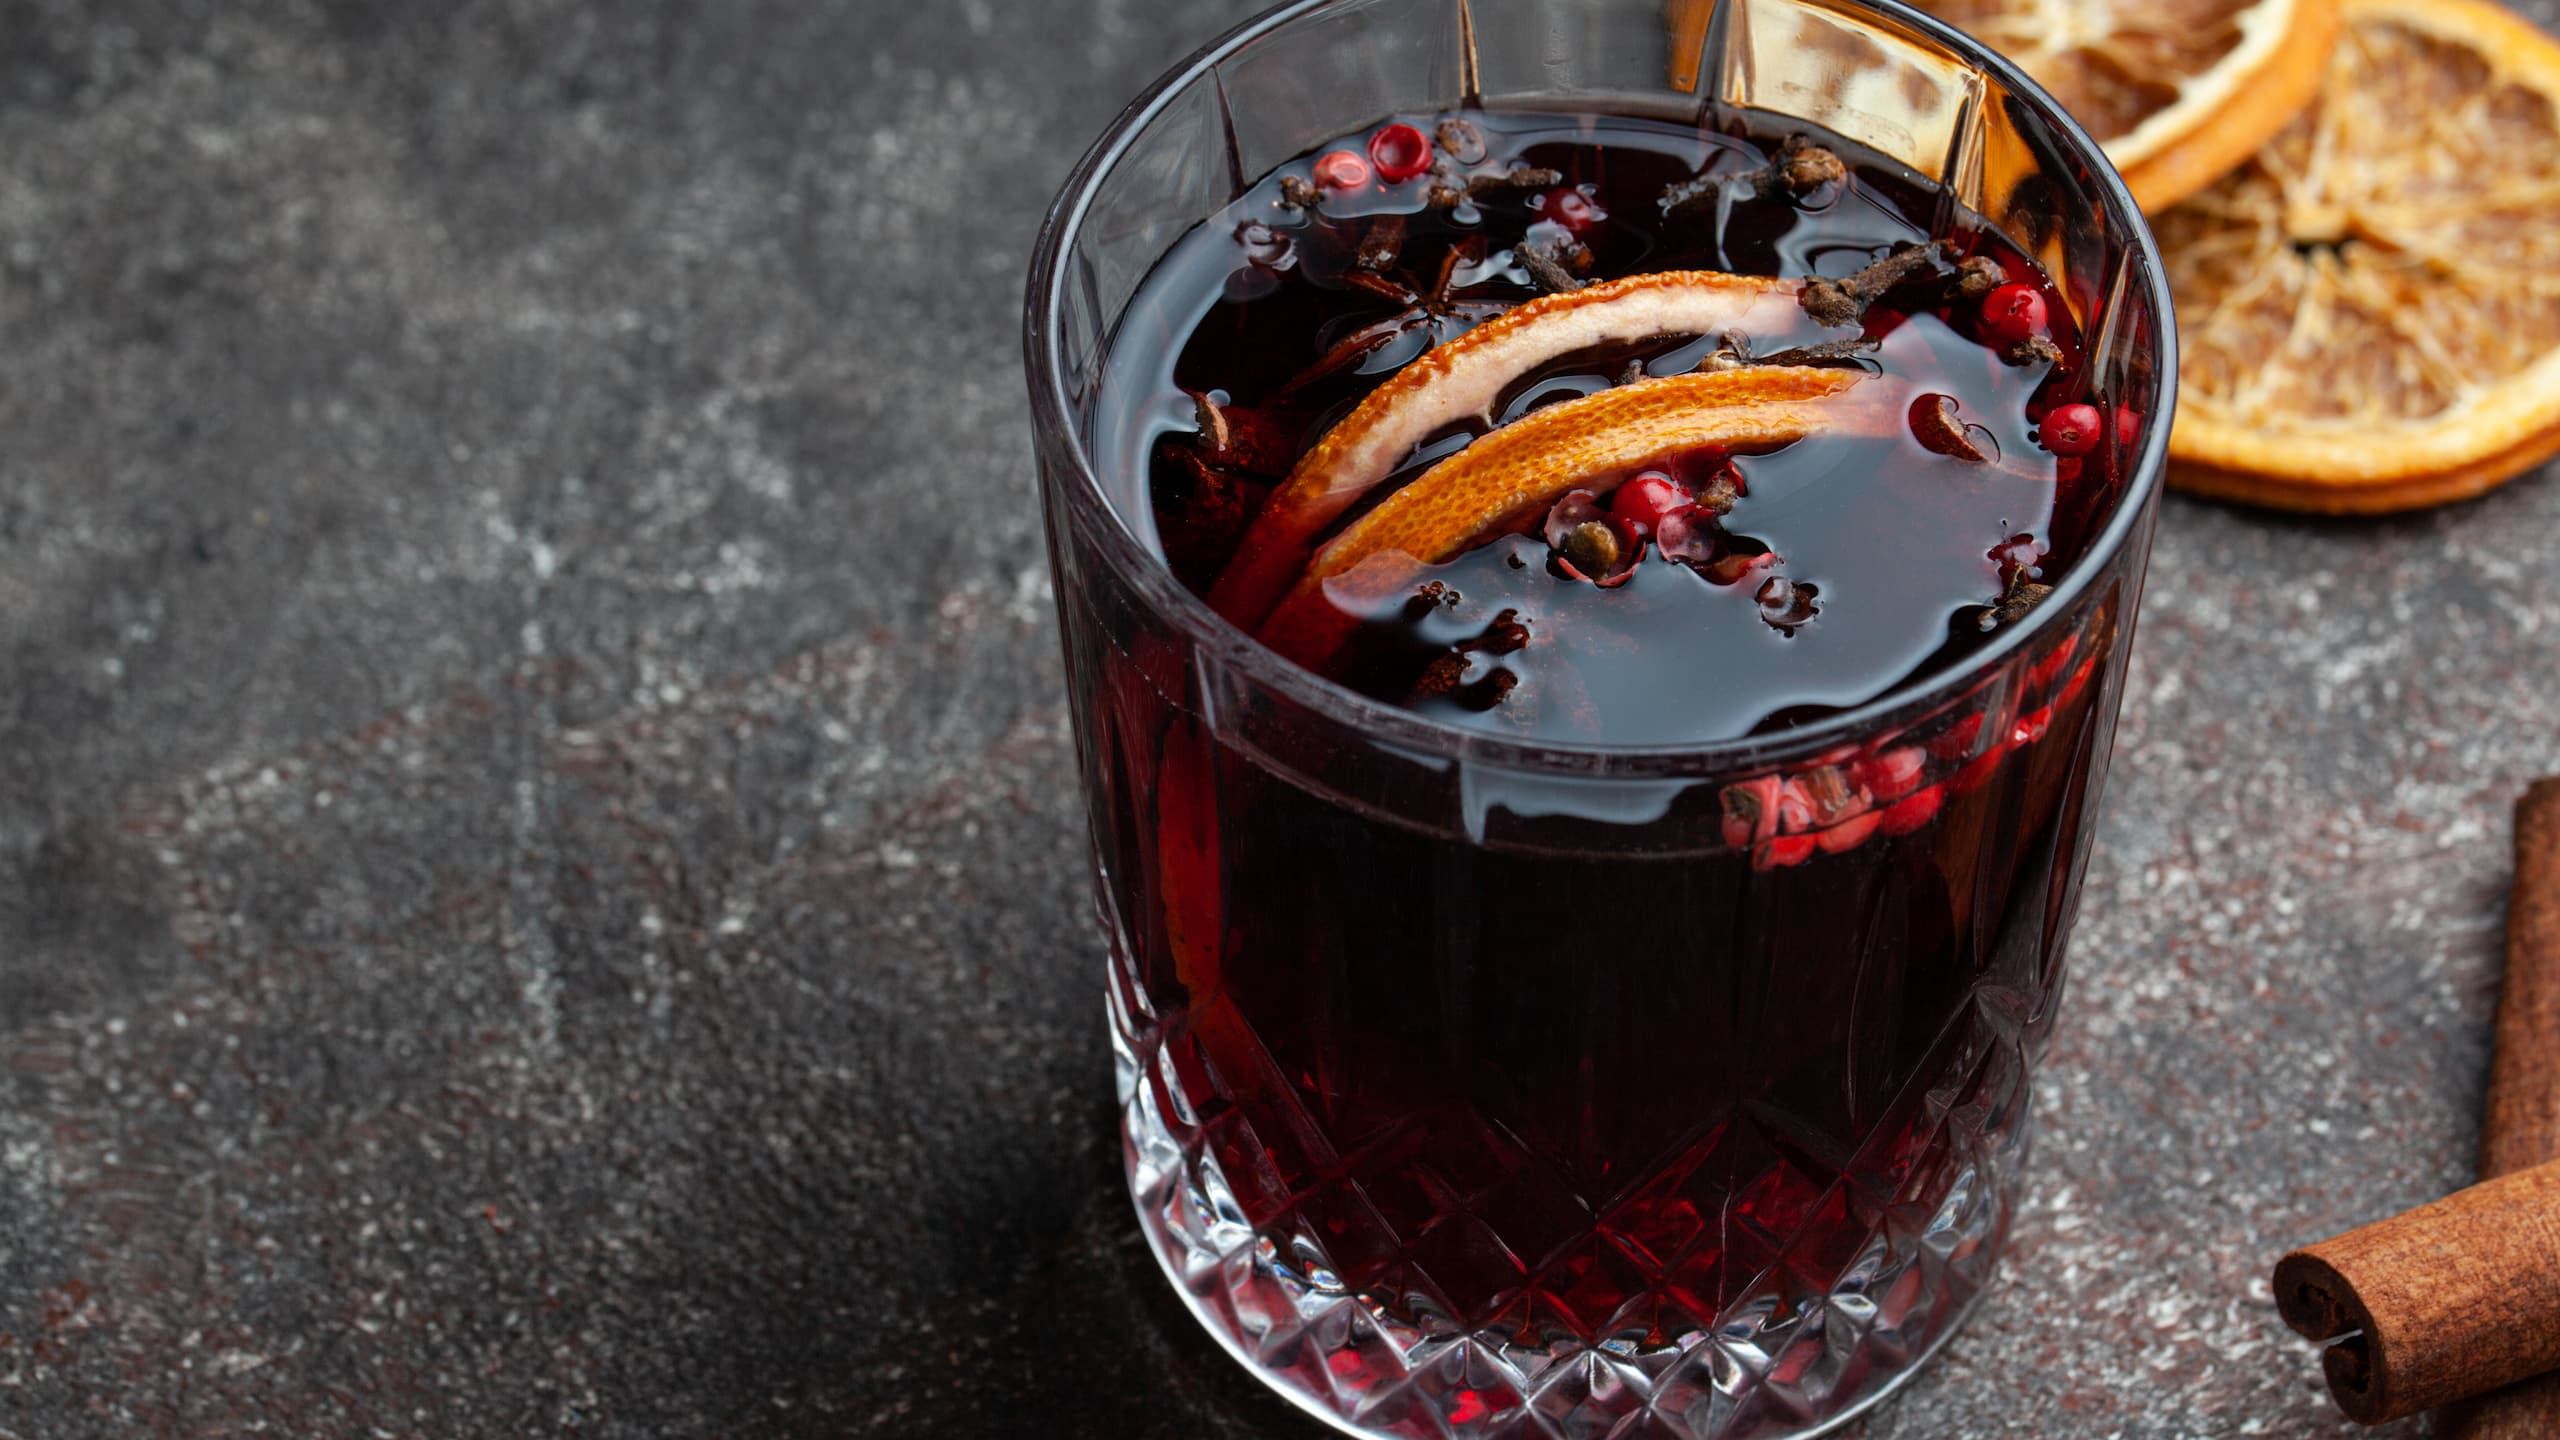 Refreshing Carrabba's blackberry sangria with dried lemon